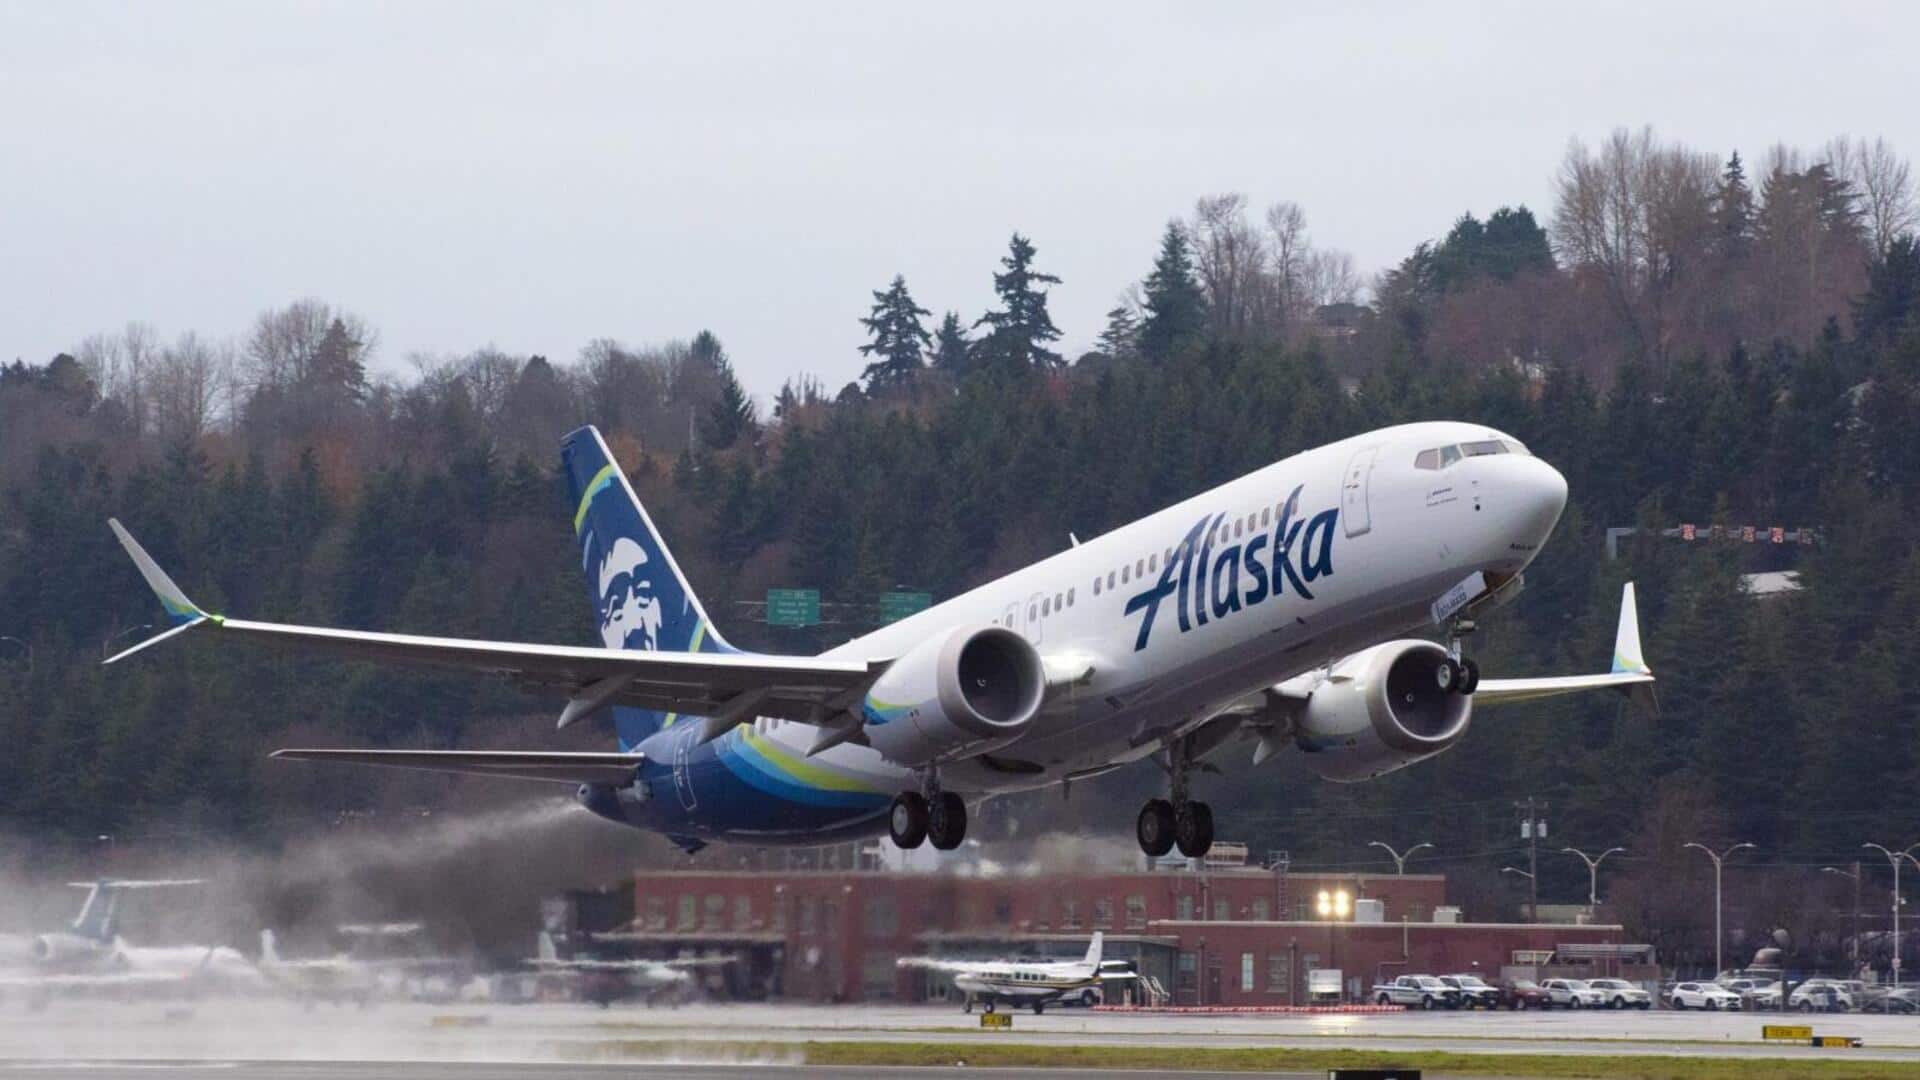 Boeing CEO calls all-hands safety meeting after Alaska Airlines incident